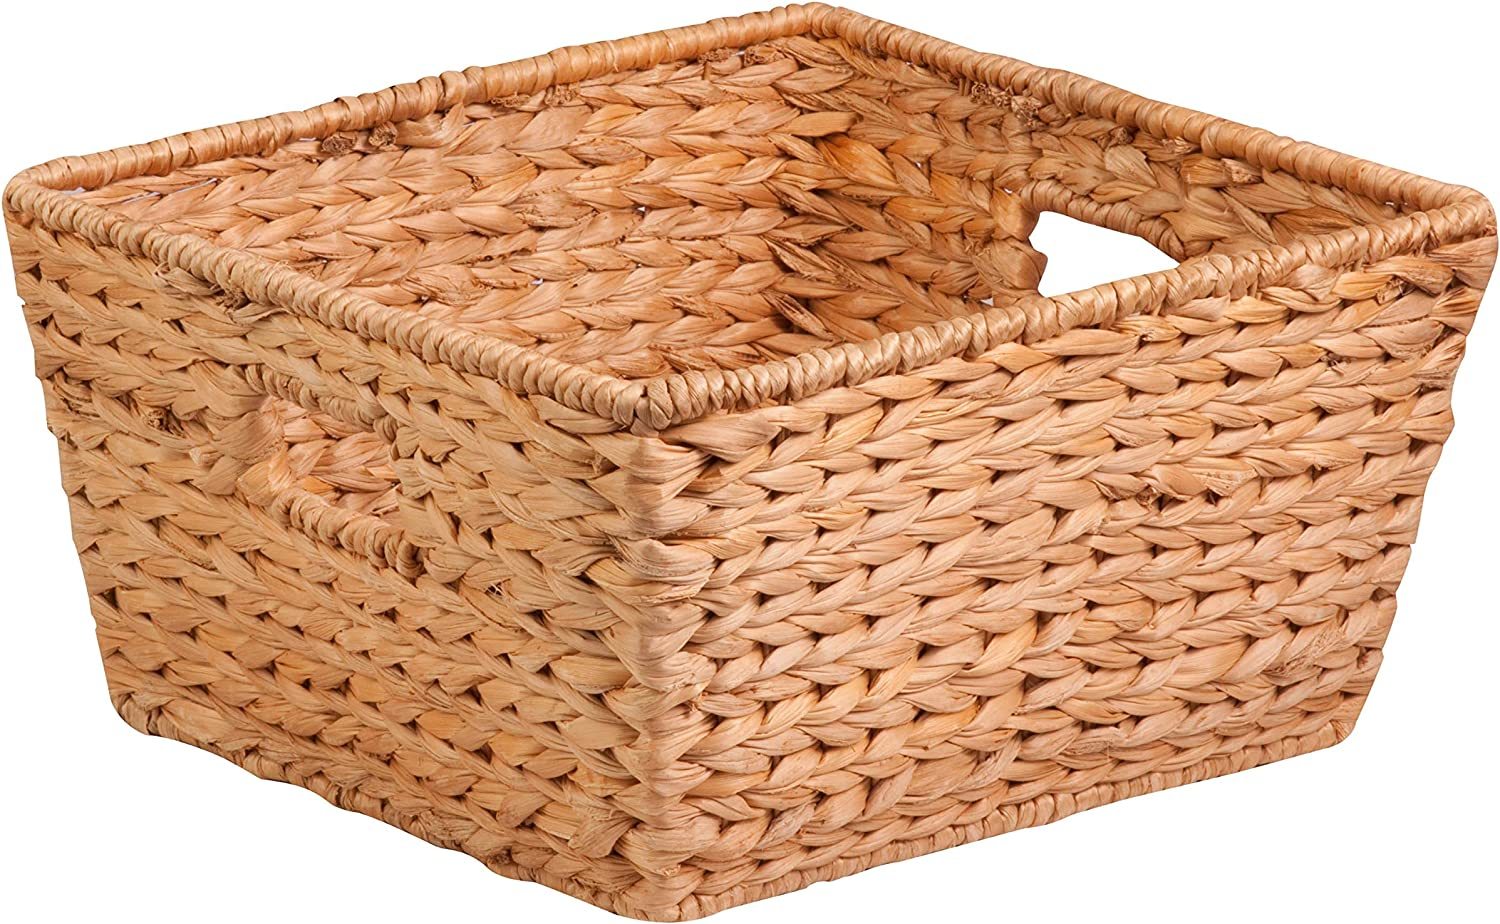 Primary image for Honey-Can-Do Natural Basket-Lg Square, Large